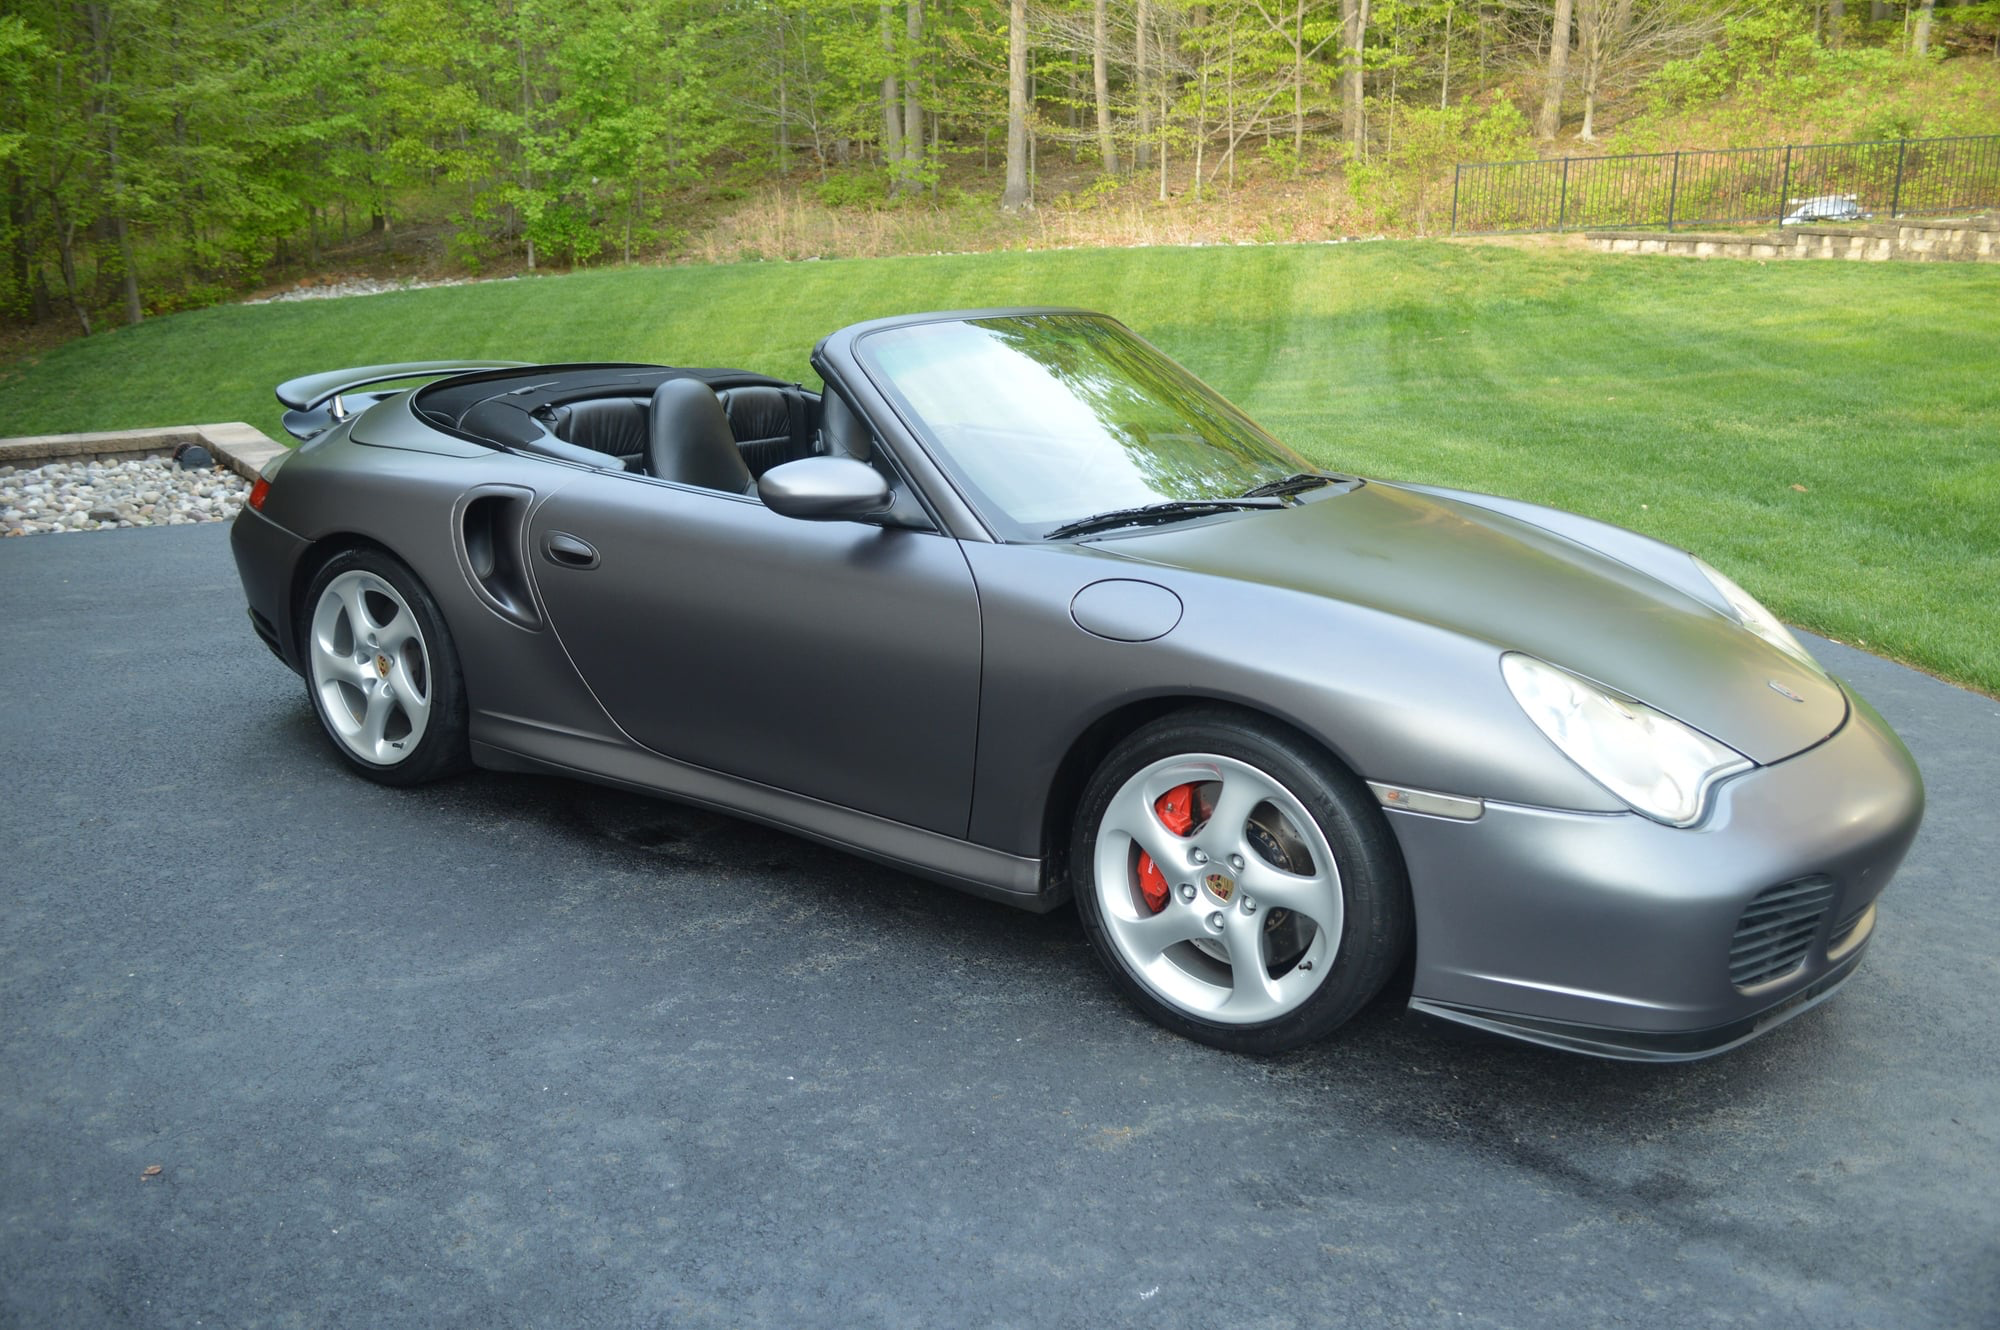 2004 Porsche 911 - 2004 Porsche 911 X-50 Turbo - 6SPD Cabriolet - Used - VIN WP0CB29934S675551 - 146,000 Miles - 6 cyl - AWD - Manual - Convertible - Silver - Perry Hall, MD 21128, United States